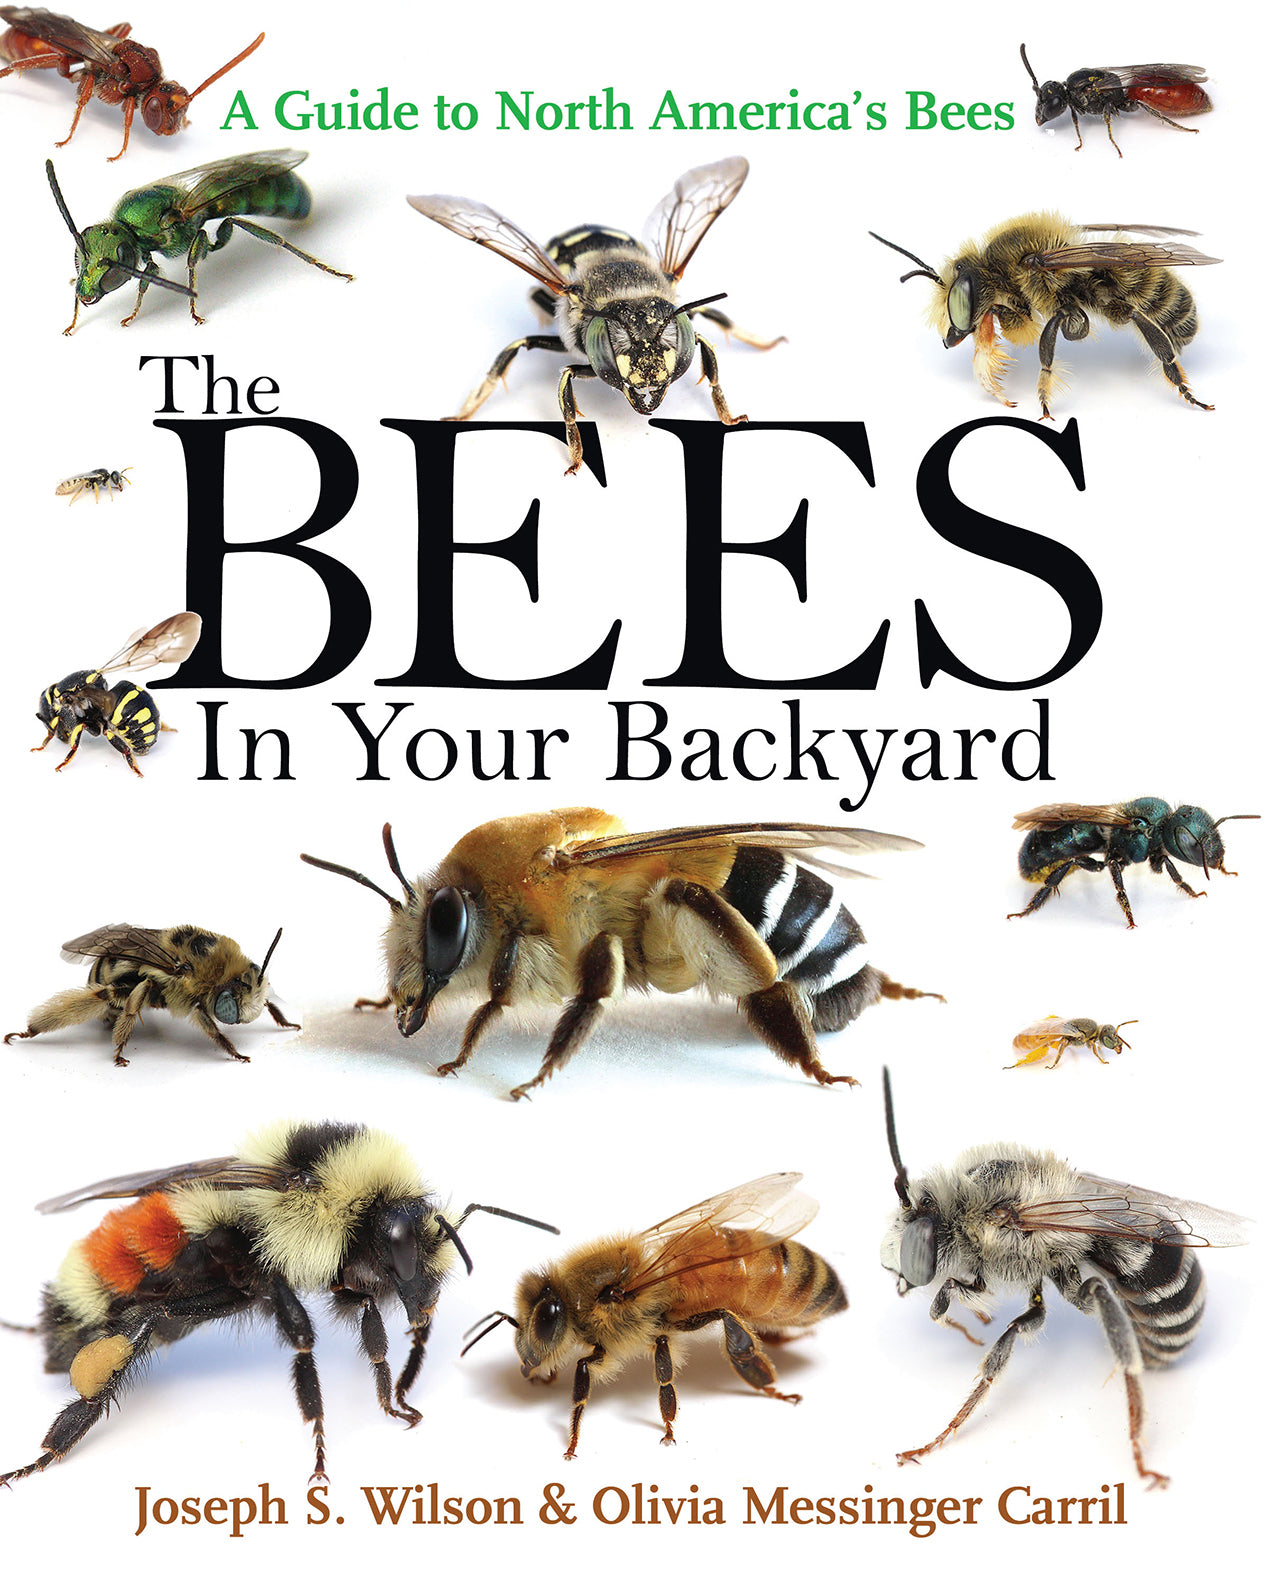 The Bees in Your Backyard: A Guide to North America's Bees, by Joseph S. Wilson & Olivia Messinger Carrill